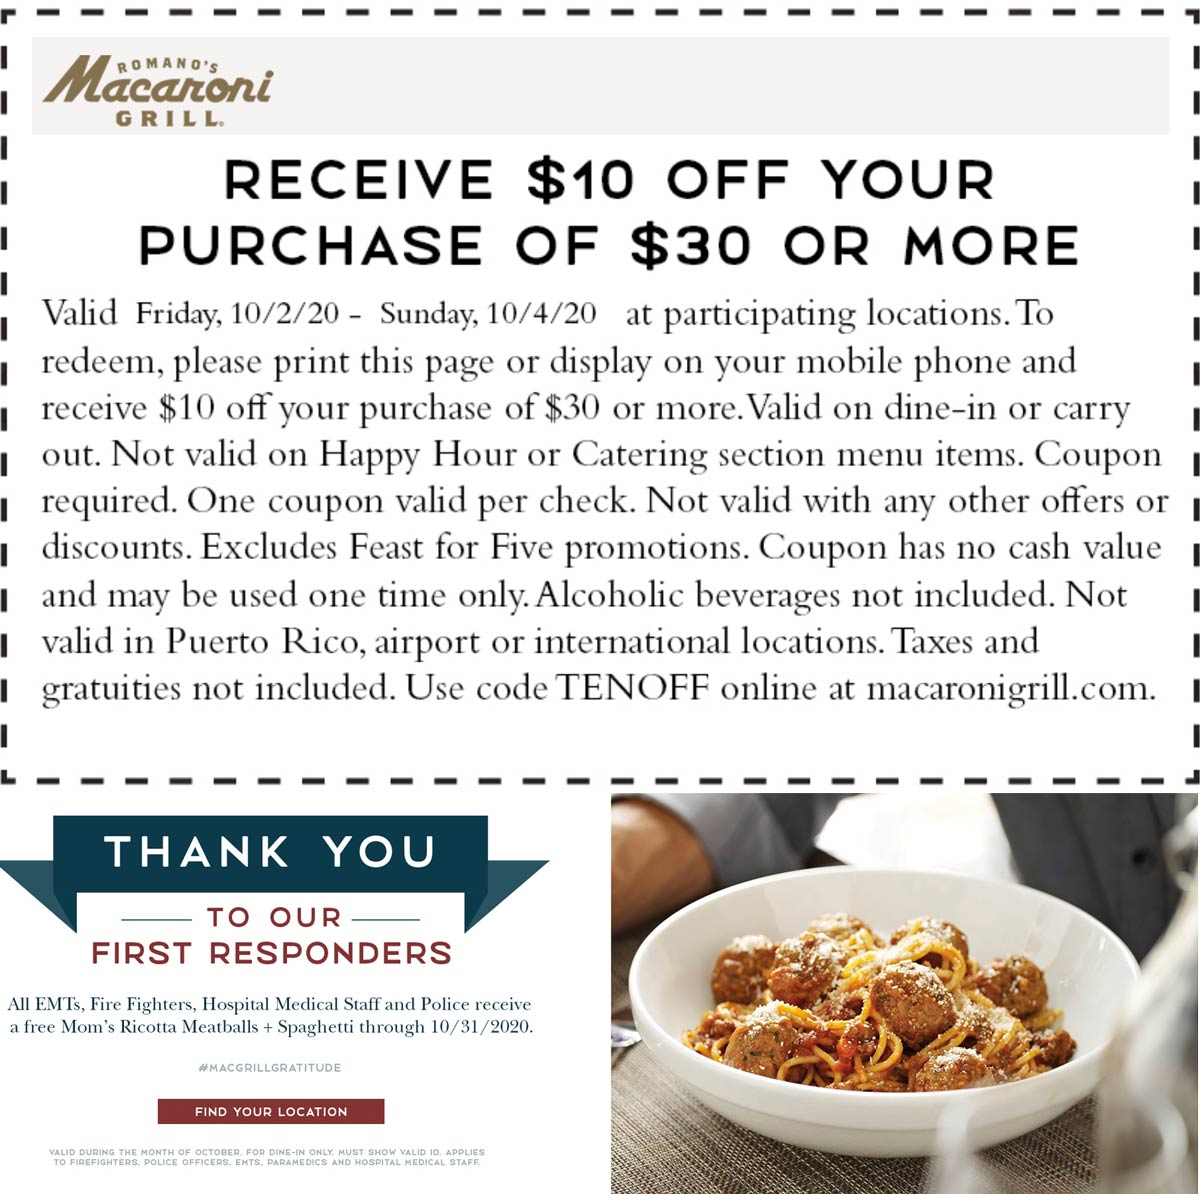 Macaroni Grill restaurants Coupon  Free meal all month for first responders & $10 off $30 at Macaroni Grill #macaronigrill 